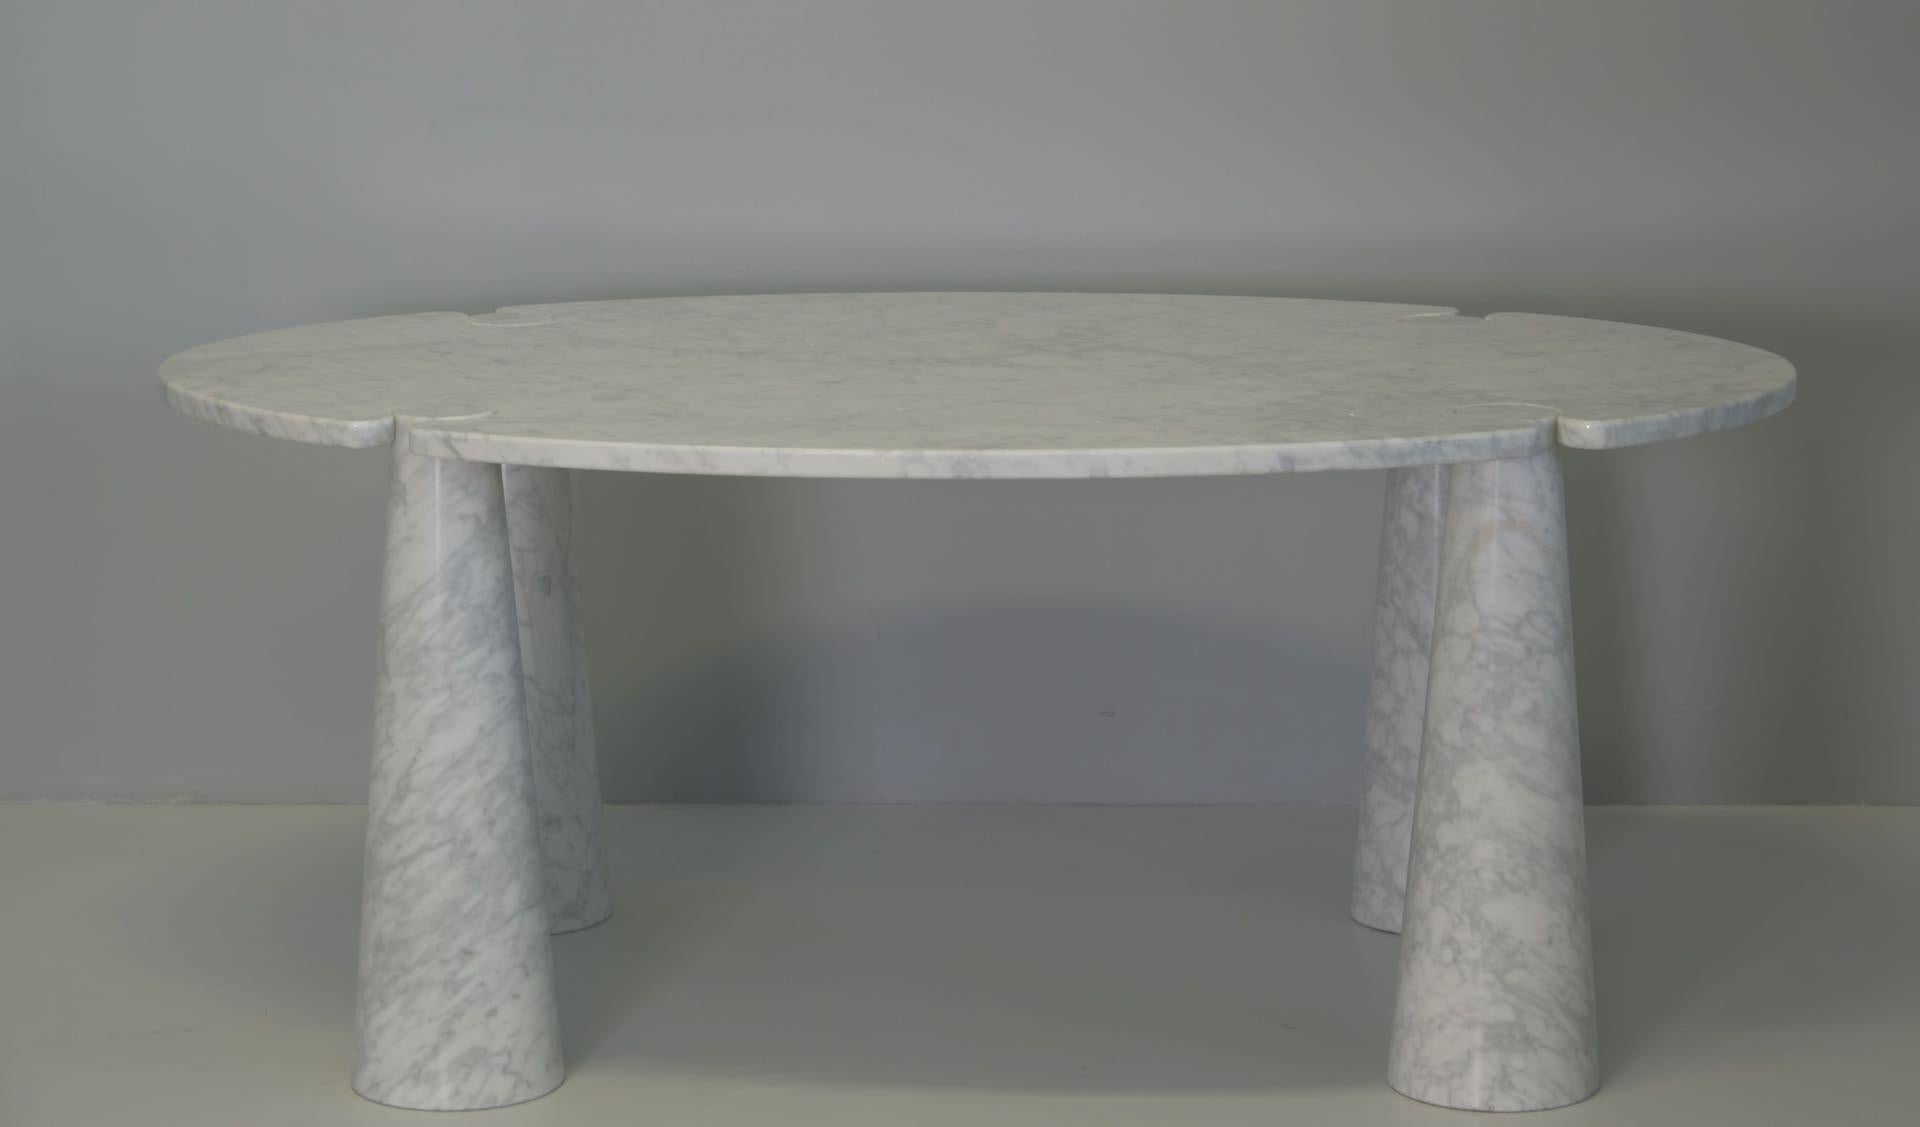 Rare big dining table by Angelo Mangiarotti for Skipper in carrara marble, whit original label.